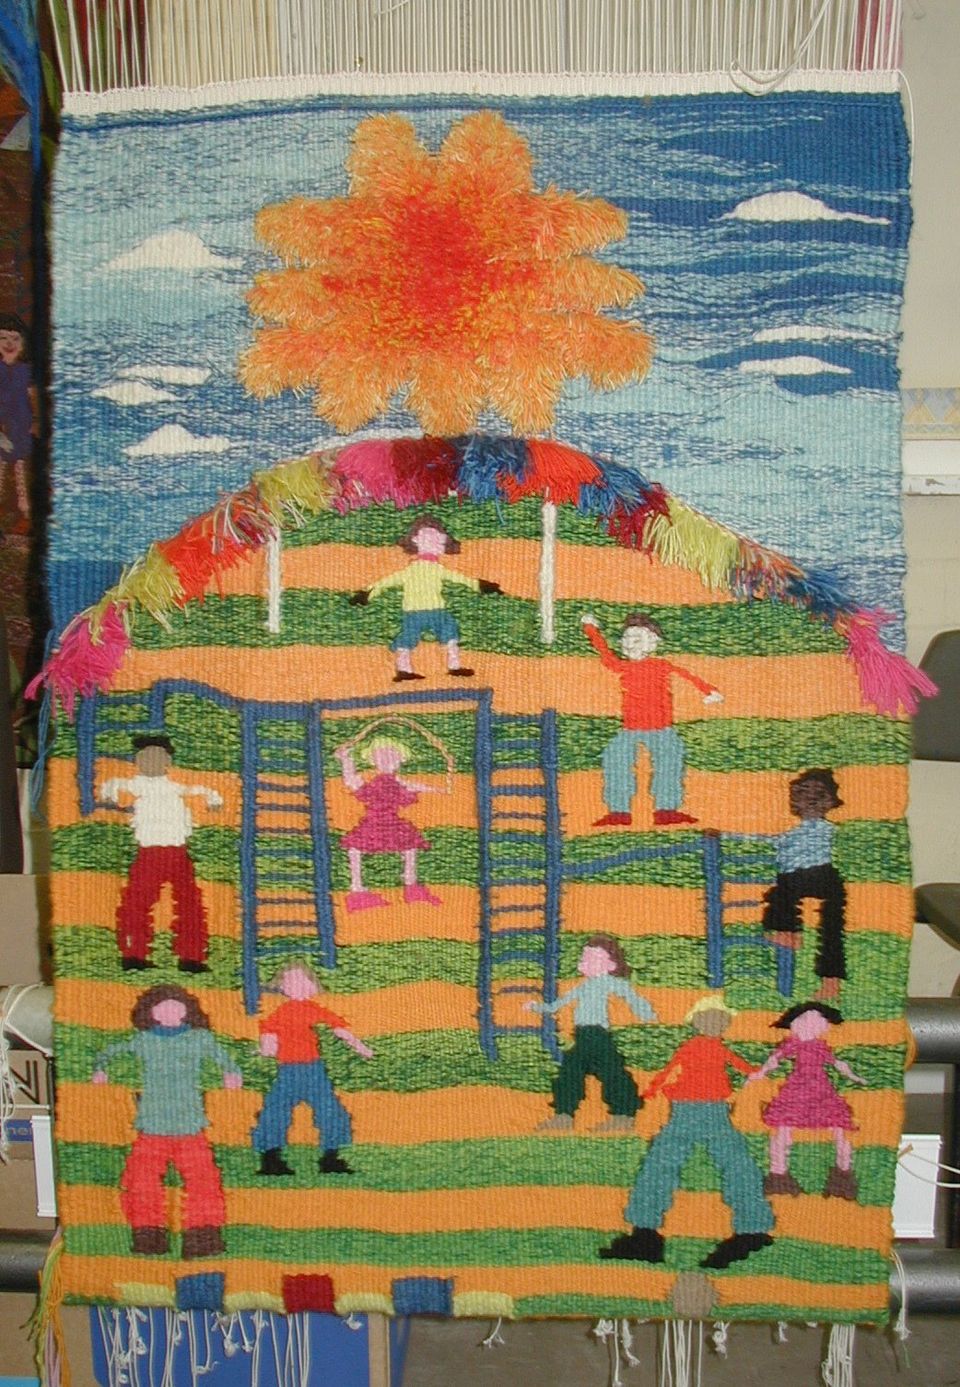 Thornhill School, Tapestry Project